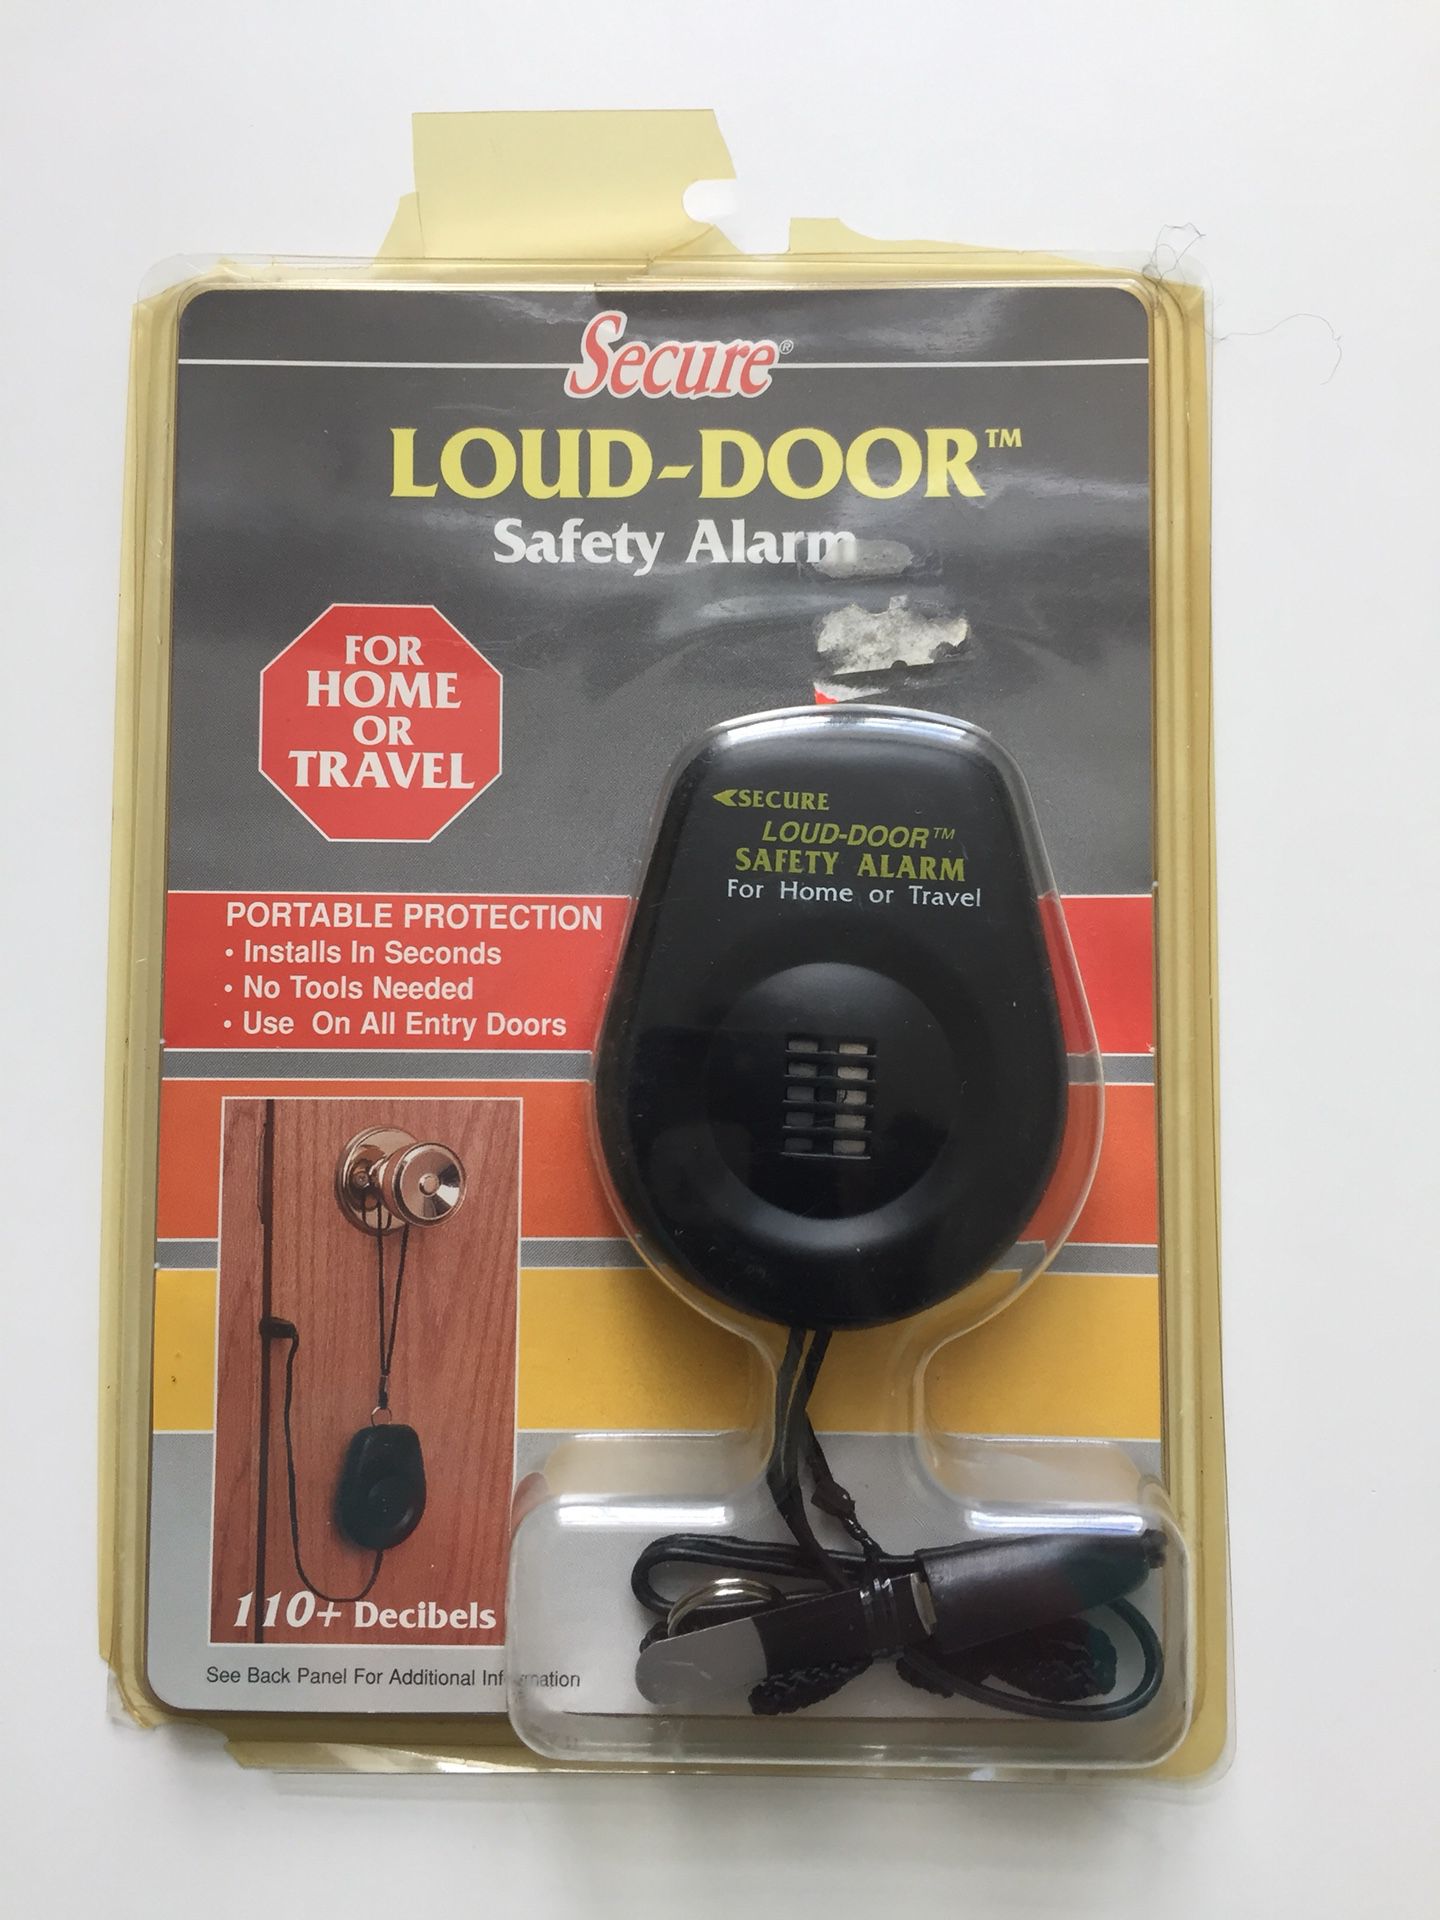 Secure Loud-Door Safety Alarm. For home or travel. Portable protection. 110+ Decibels loud. Brand new. Still sealed in original packaging. * Install